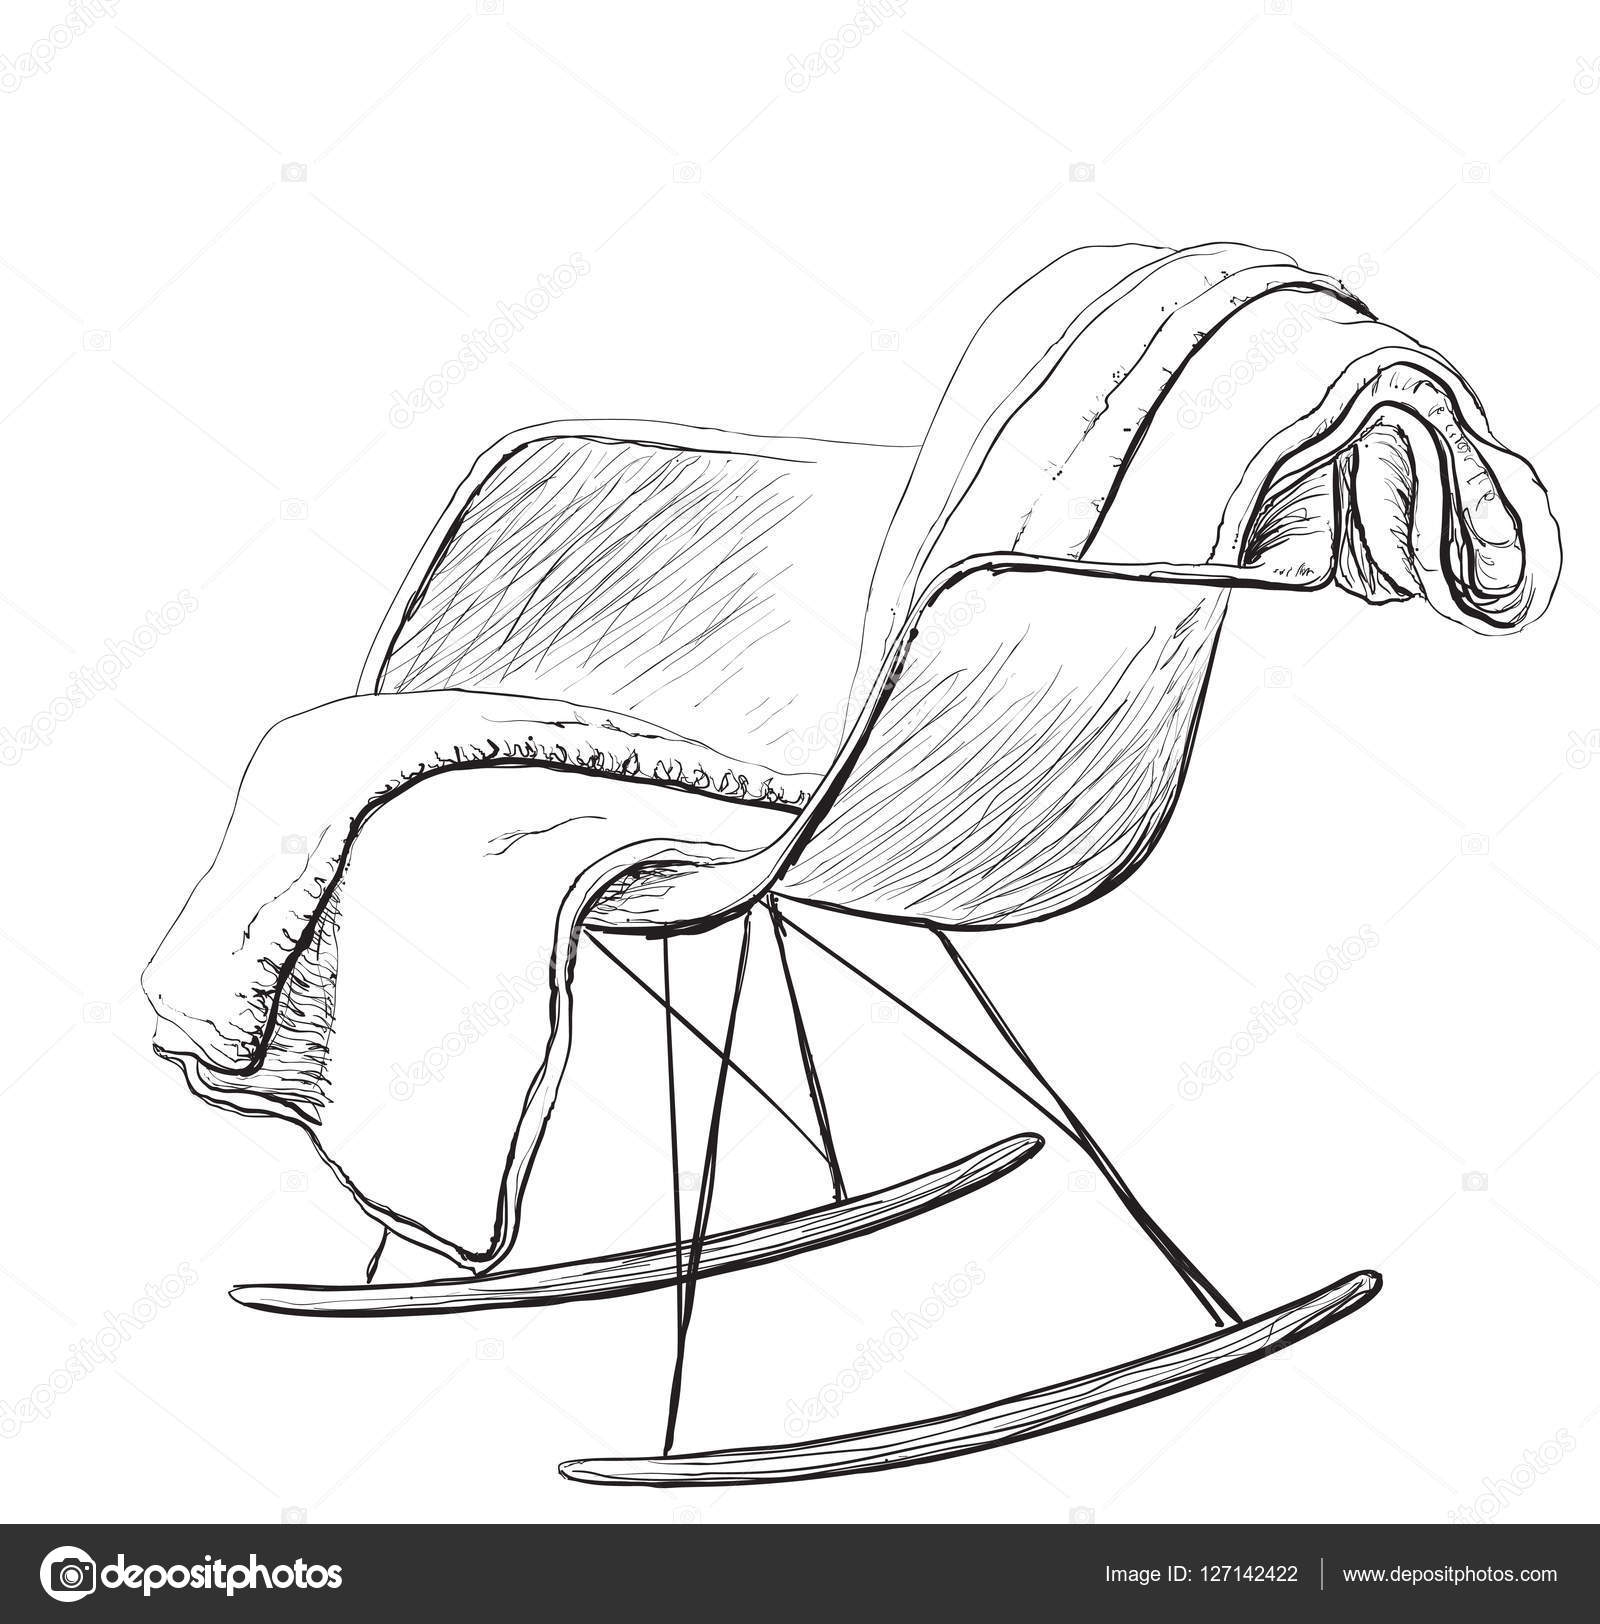 Rocking chair sketch style vector illustration Stock Vector by Yuliia25  127142422